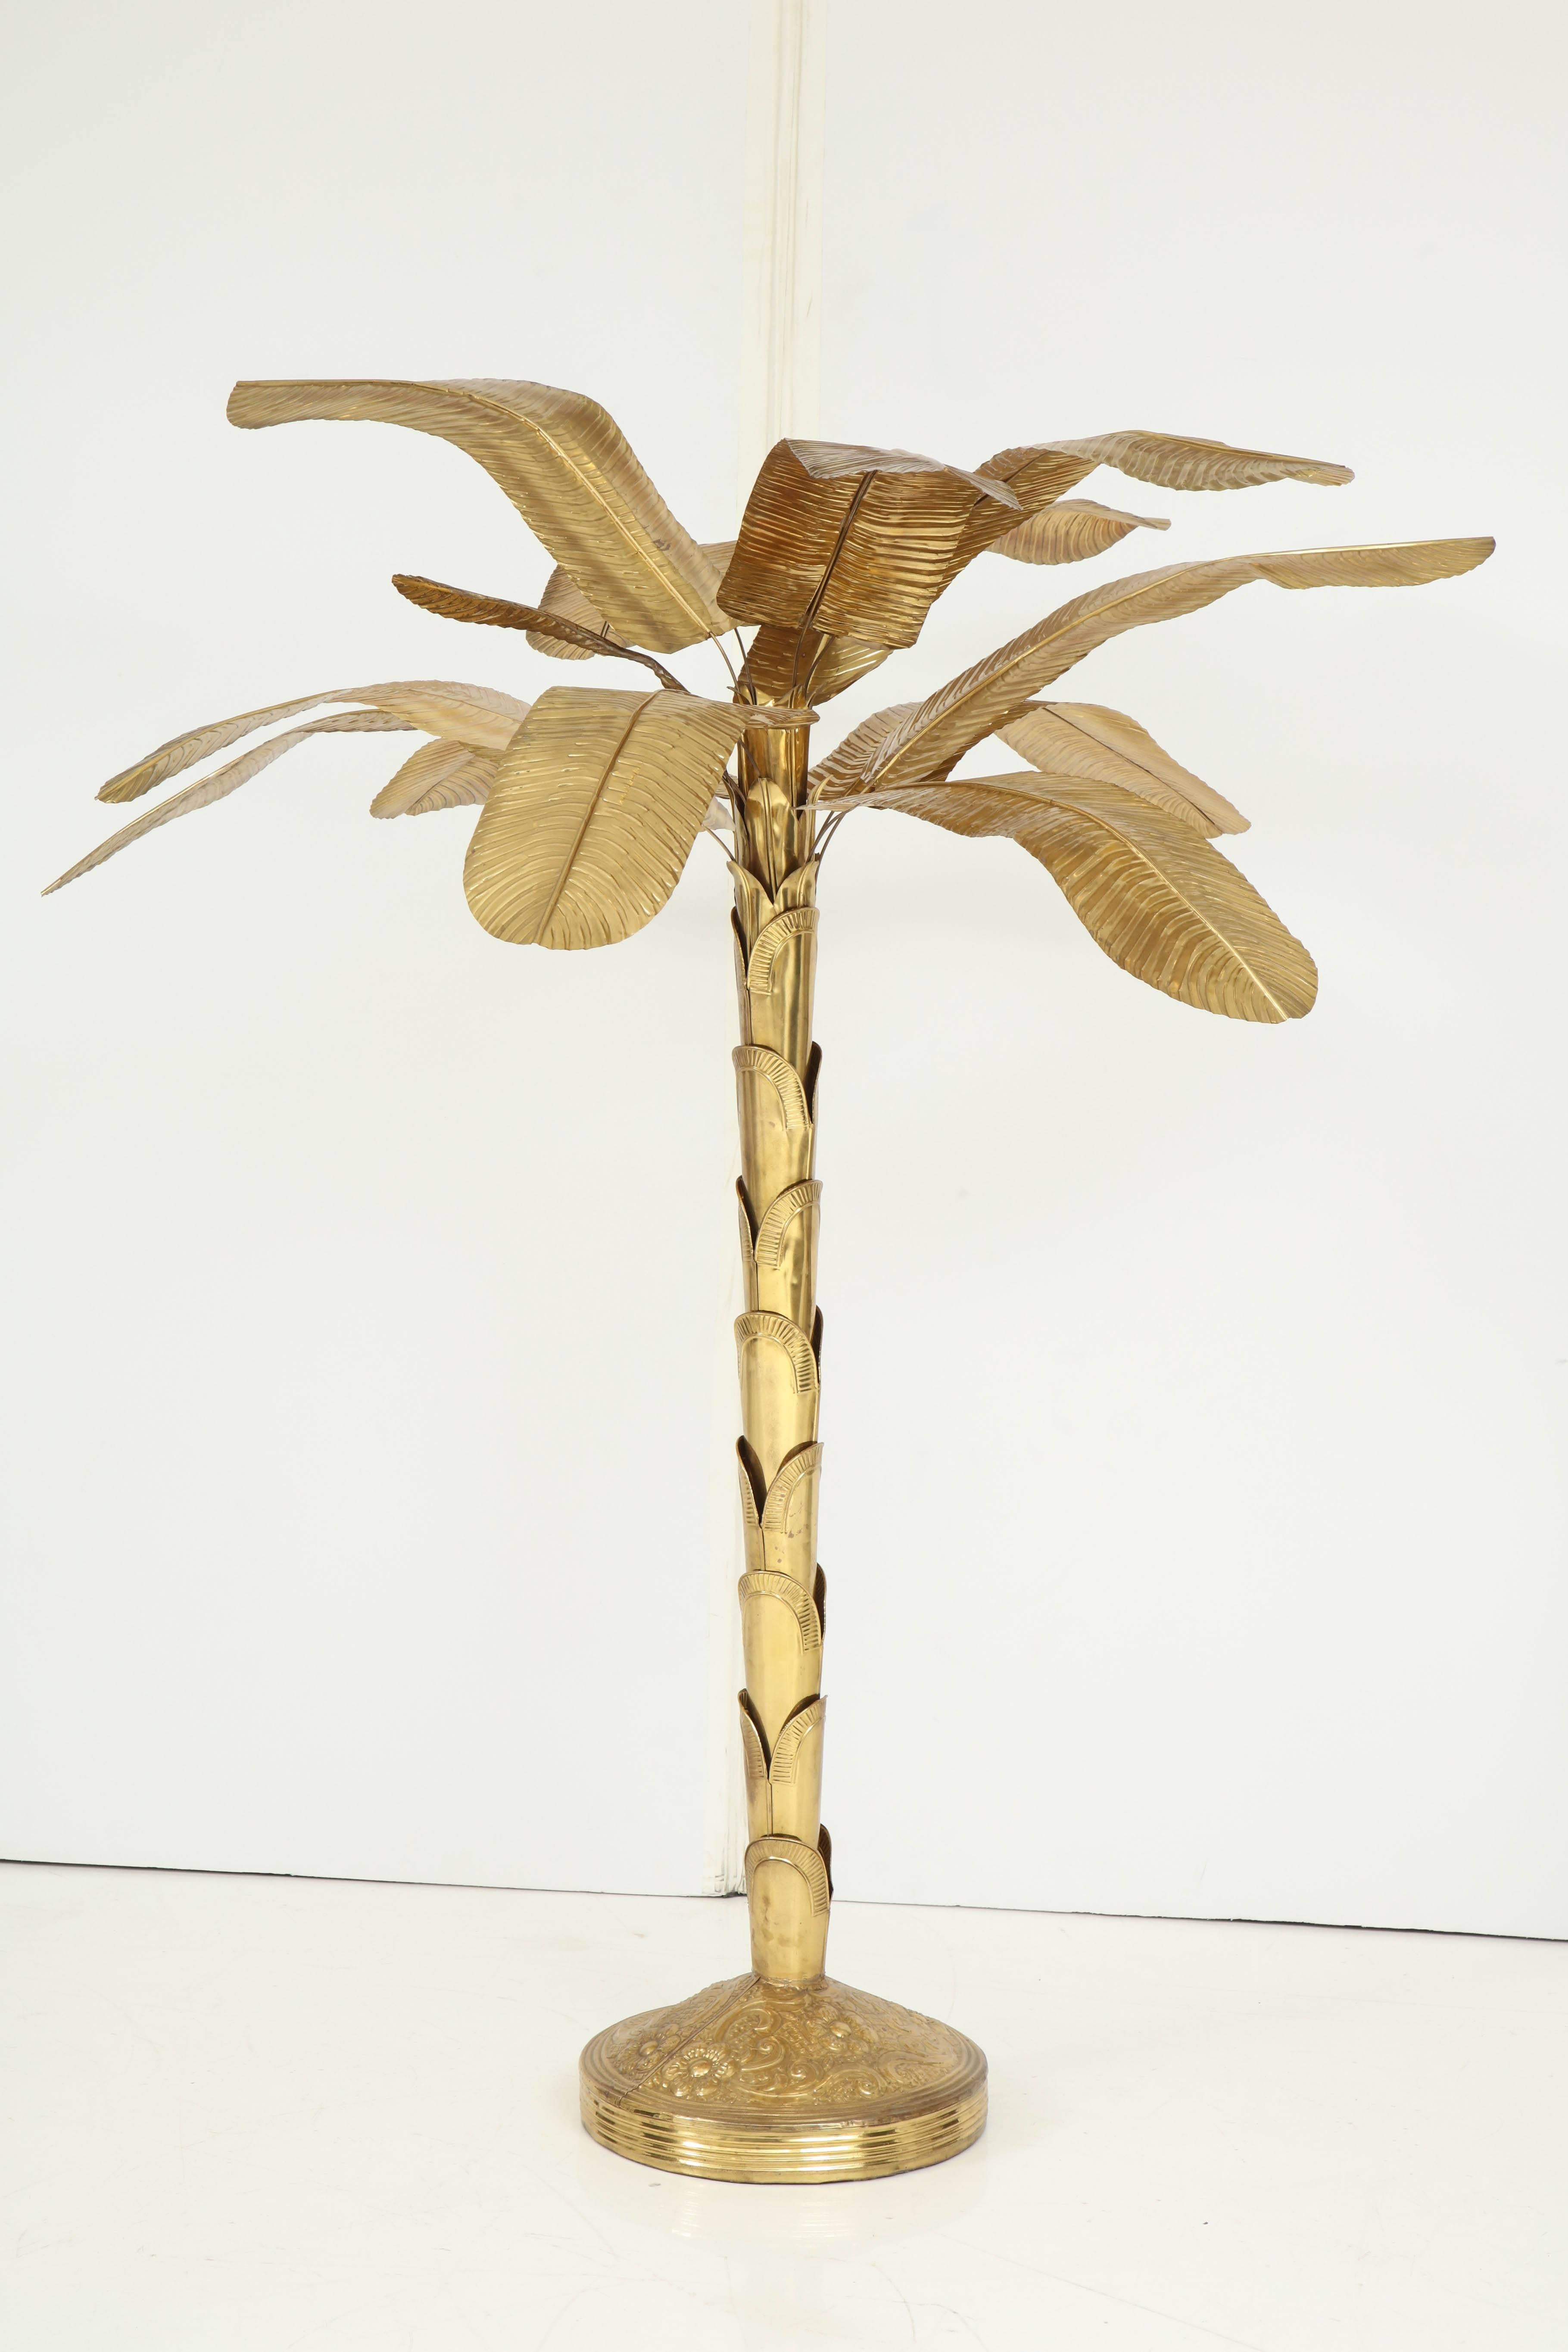 This wonderful brass banana tree adds a whimsical and bright touch to any room. A true work of art crafted to truly resemble the real thing -- minus the fruit, of course! The sculptural trunk in a round, decorated base, supports leaves with